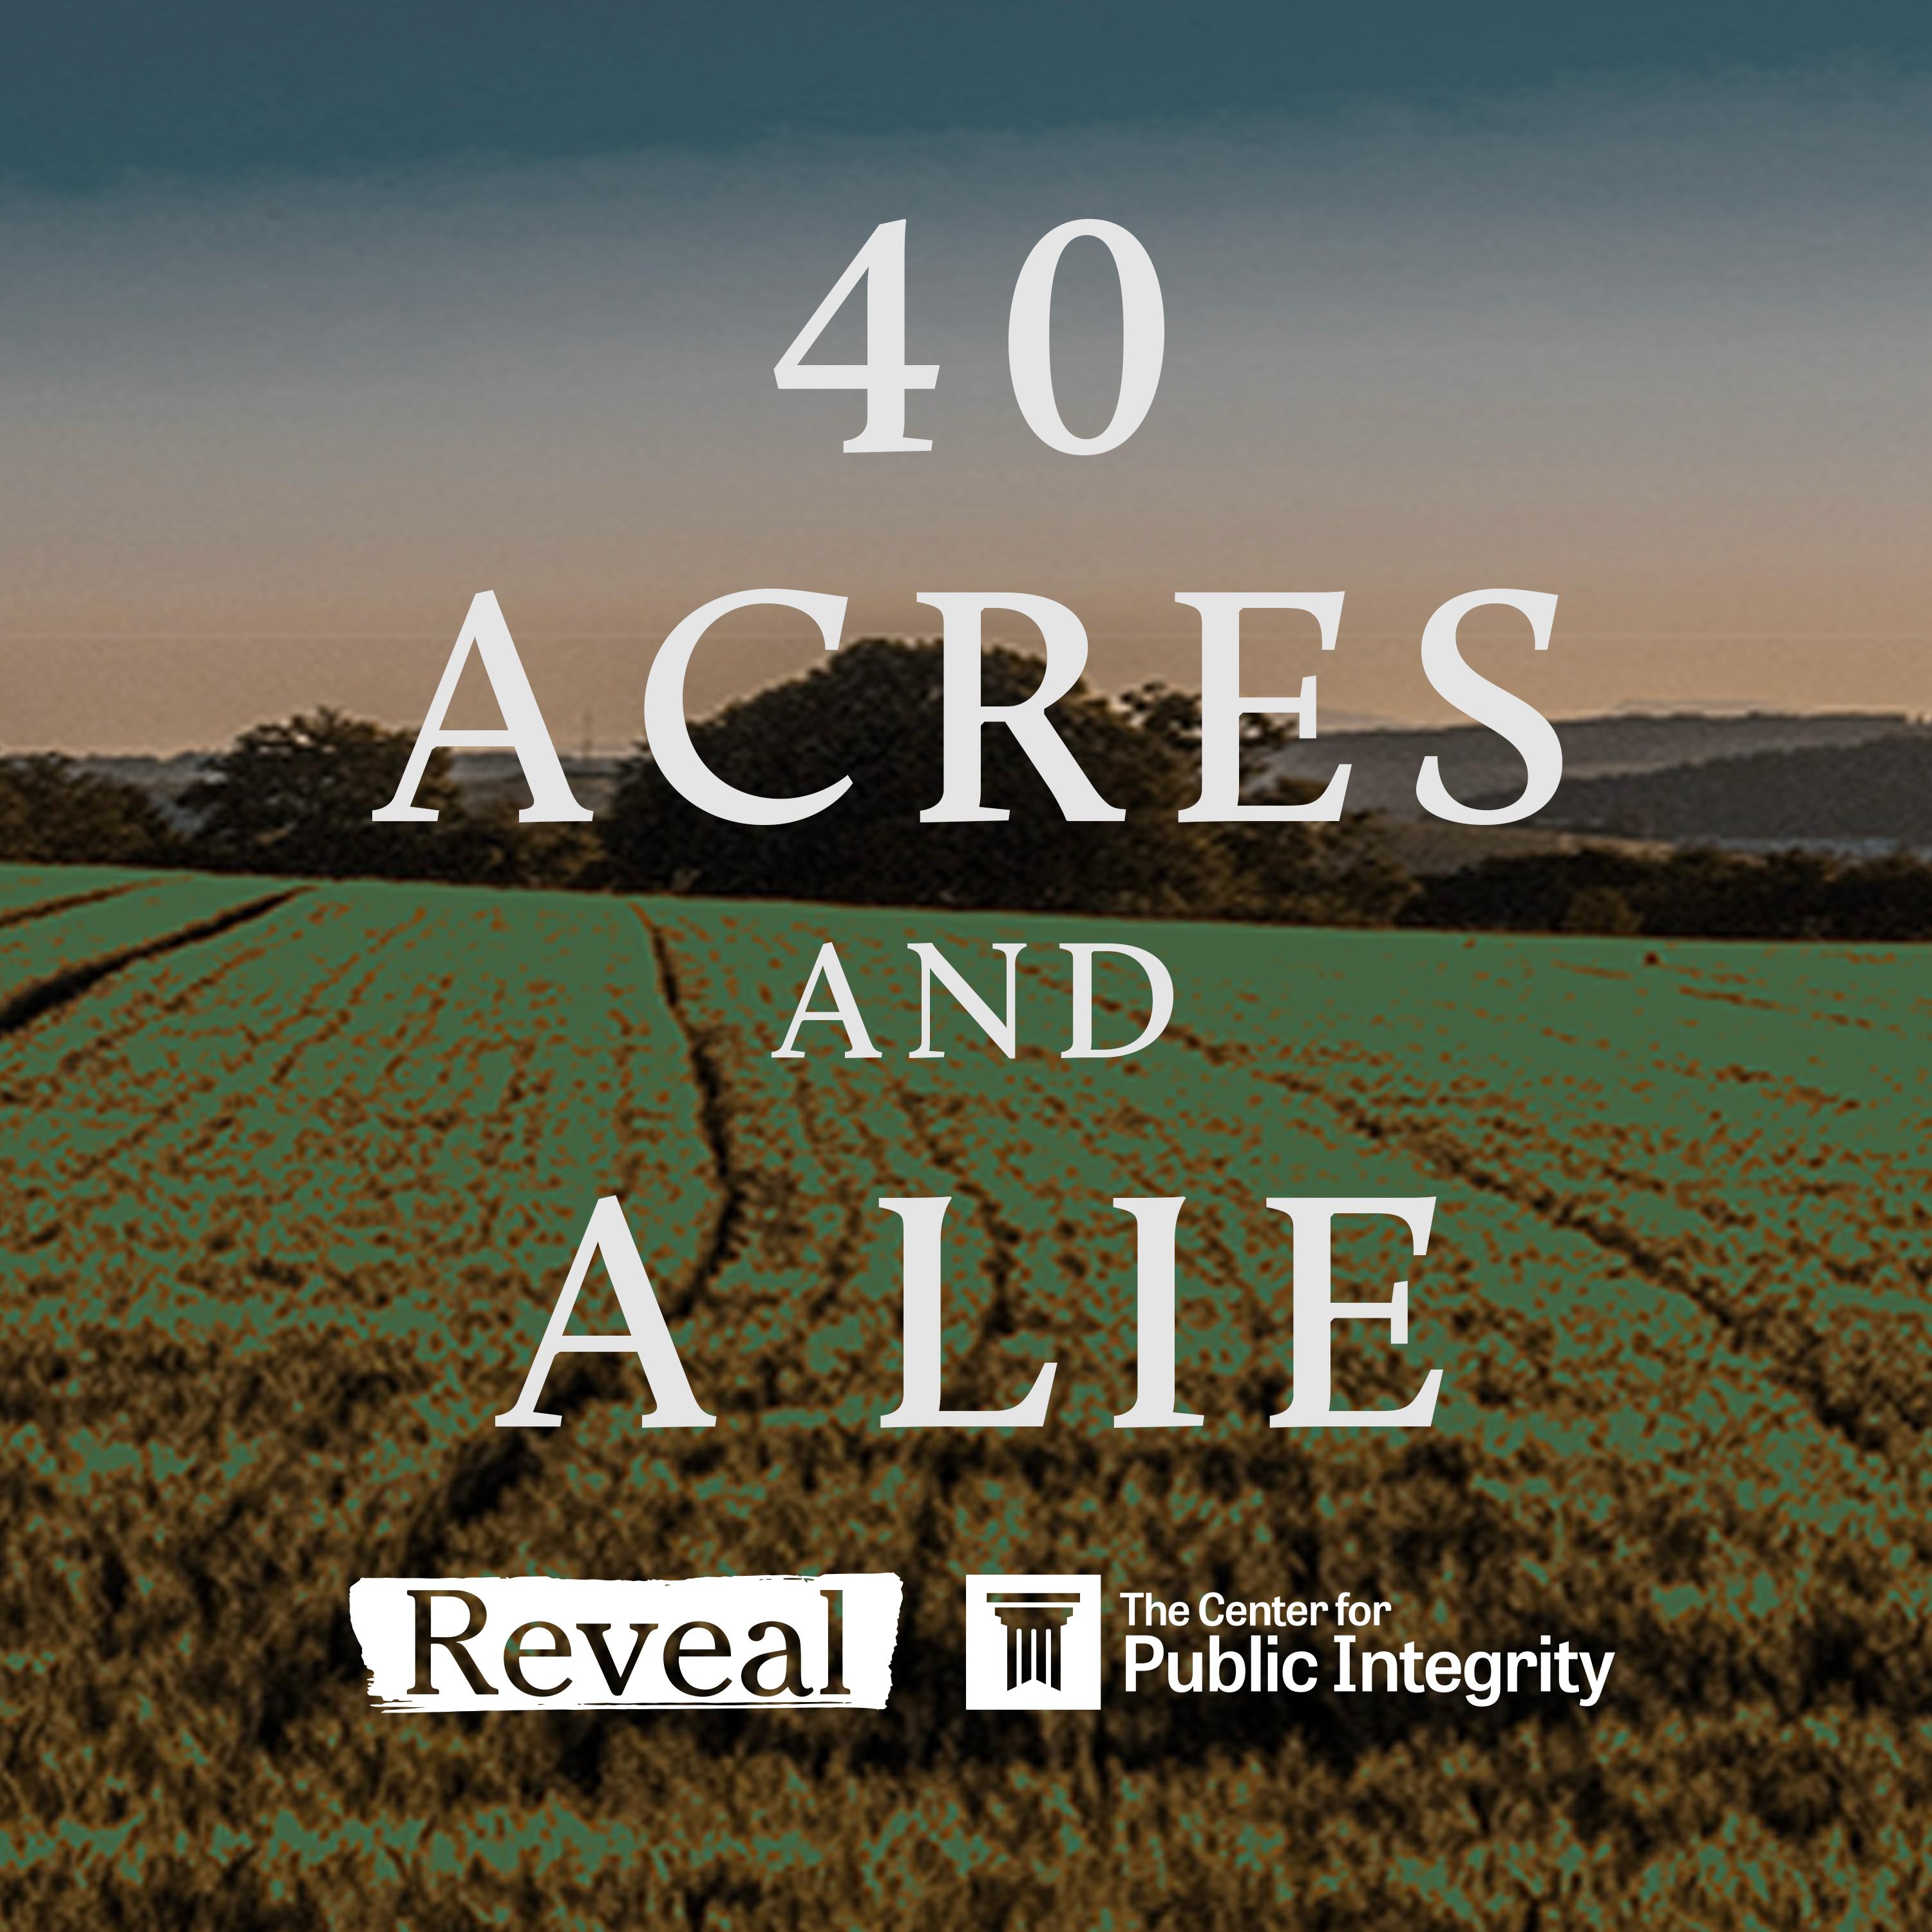 Thumbnail for "40 Acres and a Lie Trailer".